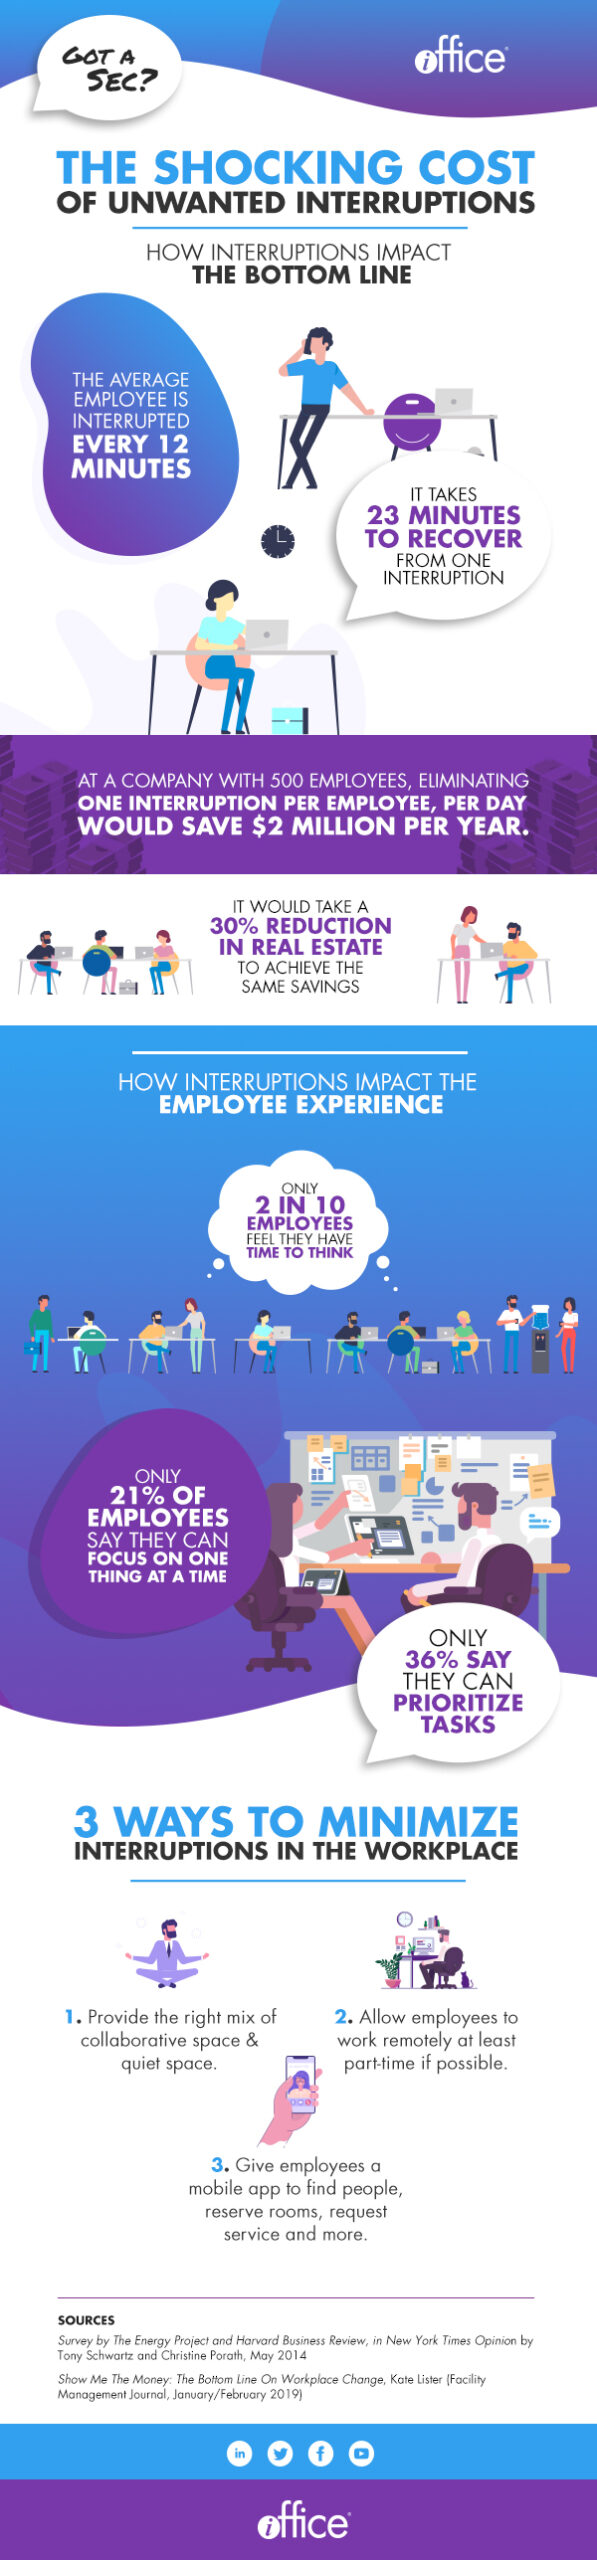 Workplace-interruptions-infographic